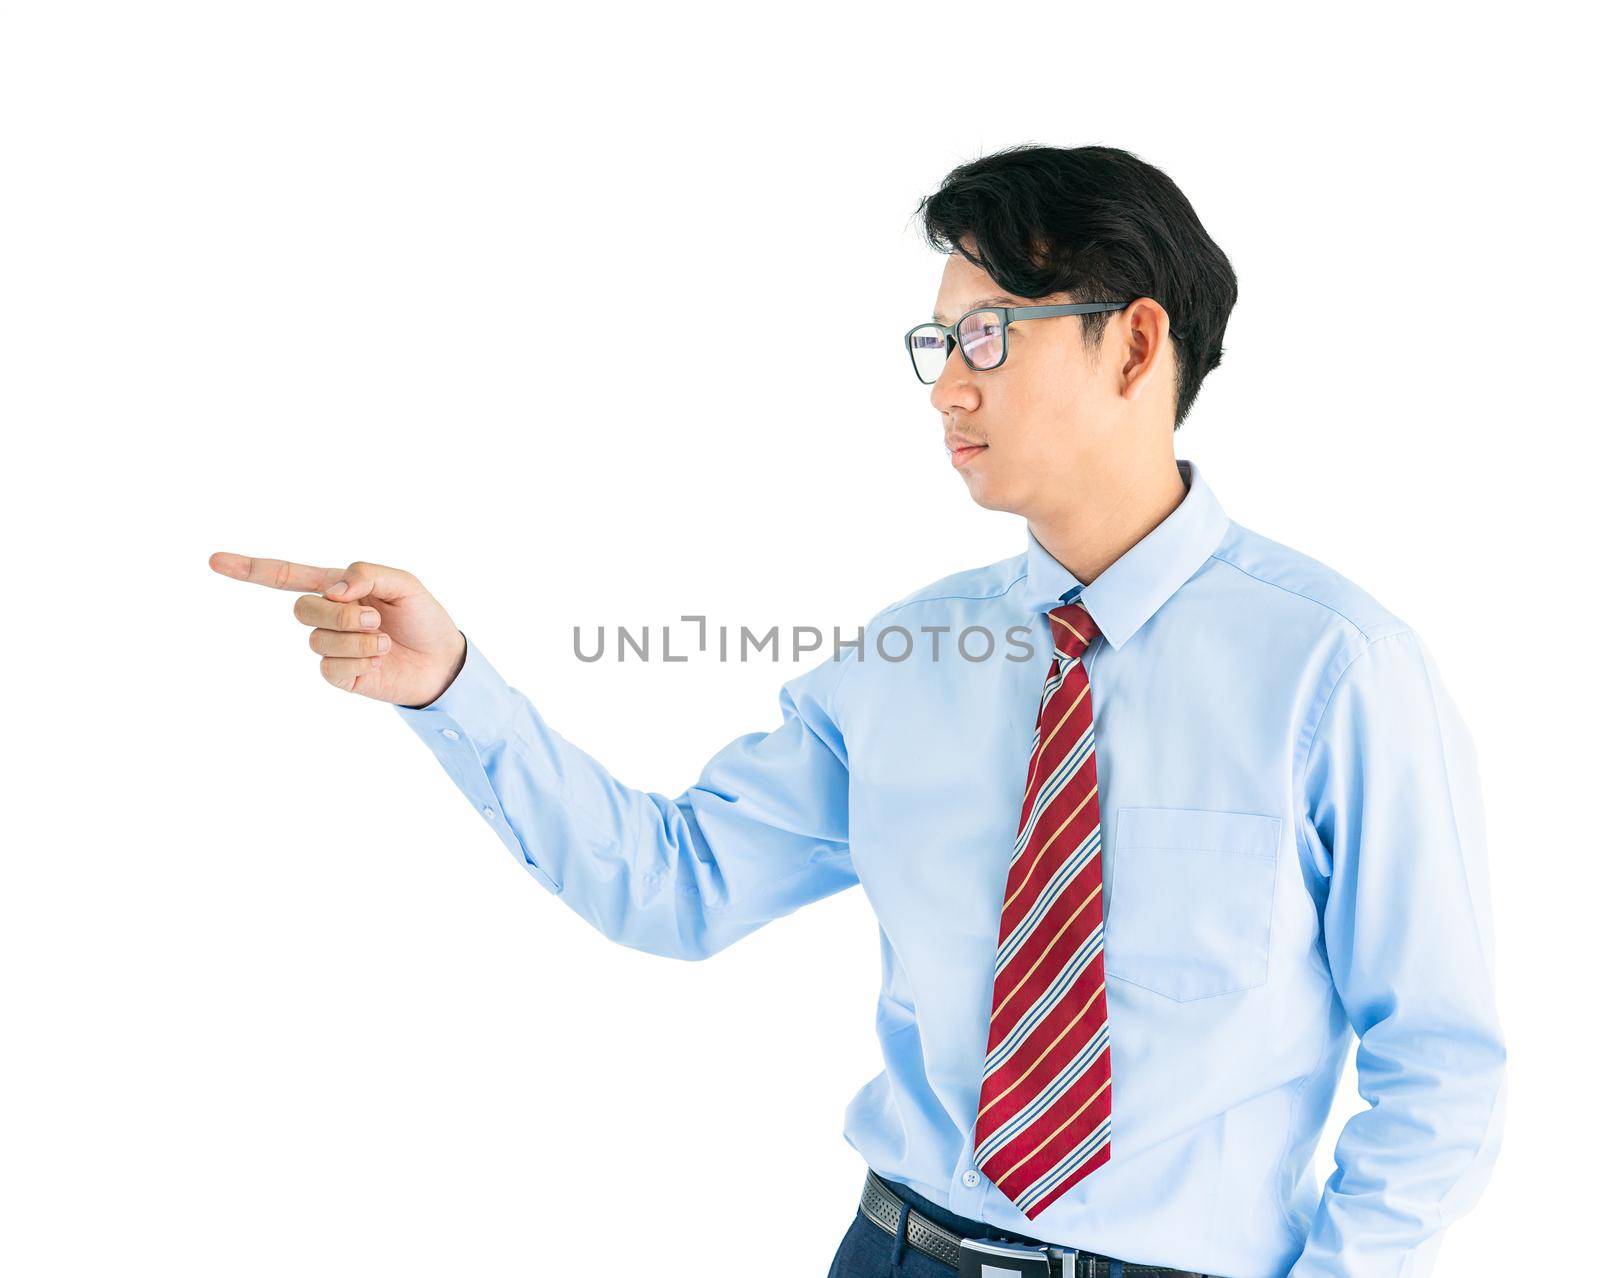 Male wearing blue shirt and red tie reaching hand out isolated on white background